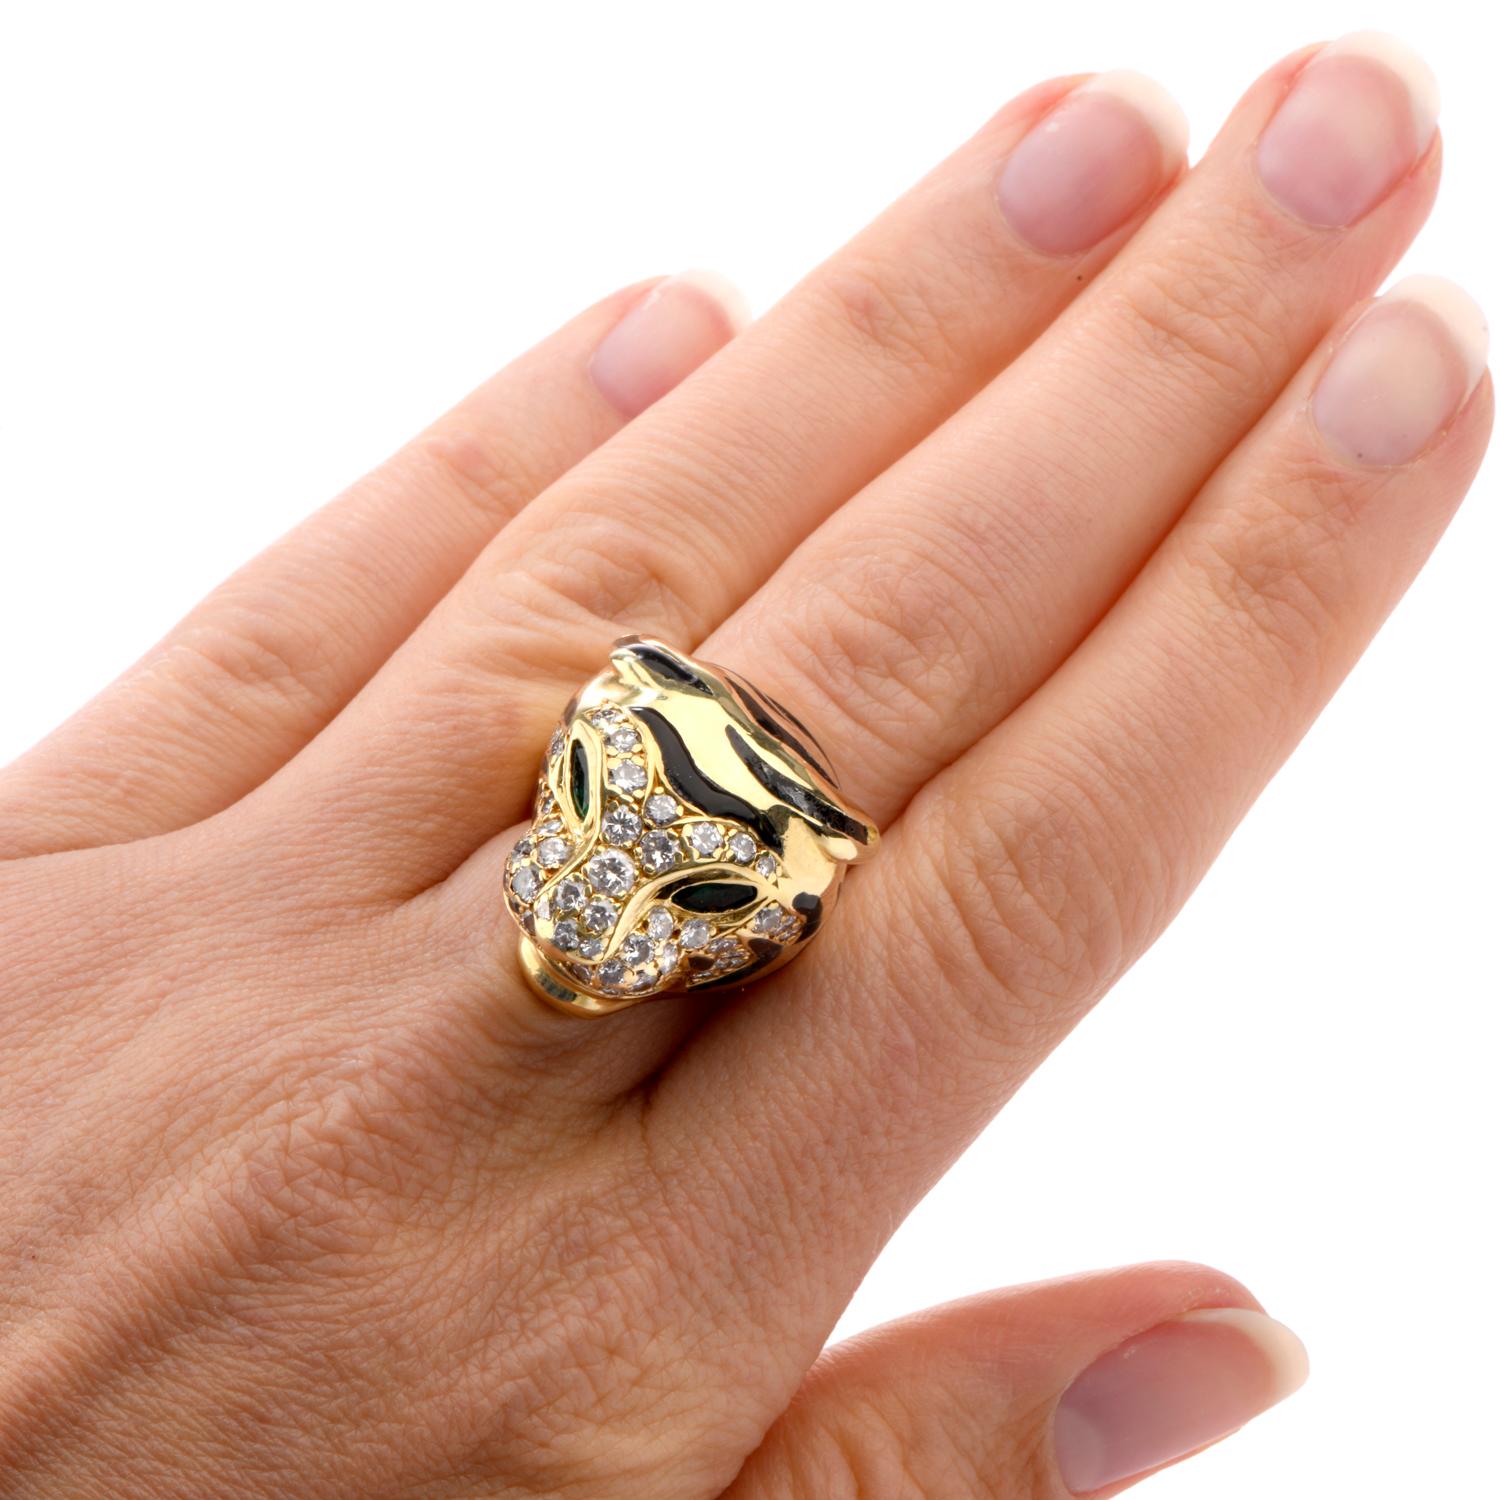 This striking cocktail ring was inspired in a Panther Head motif

and crafted in yellow 18K.

Featuring Marquise shaped Emerald eyes and round brilliant

cut diamonds throughout the face and head.

Vibrant black stripes of enamel offer